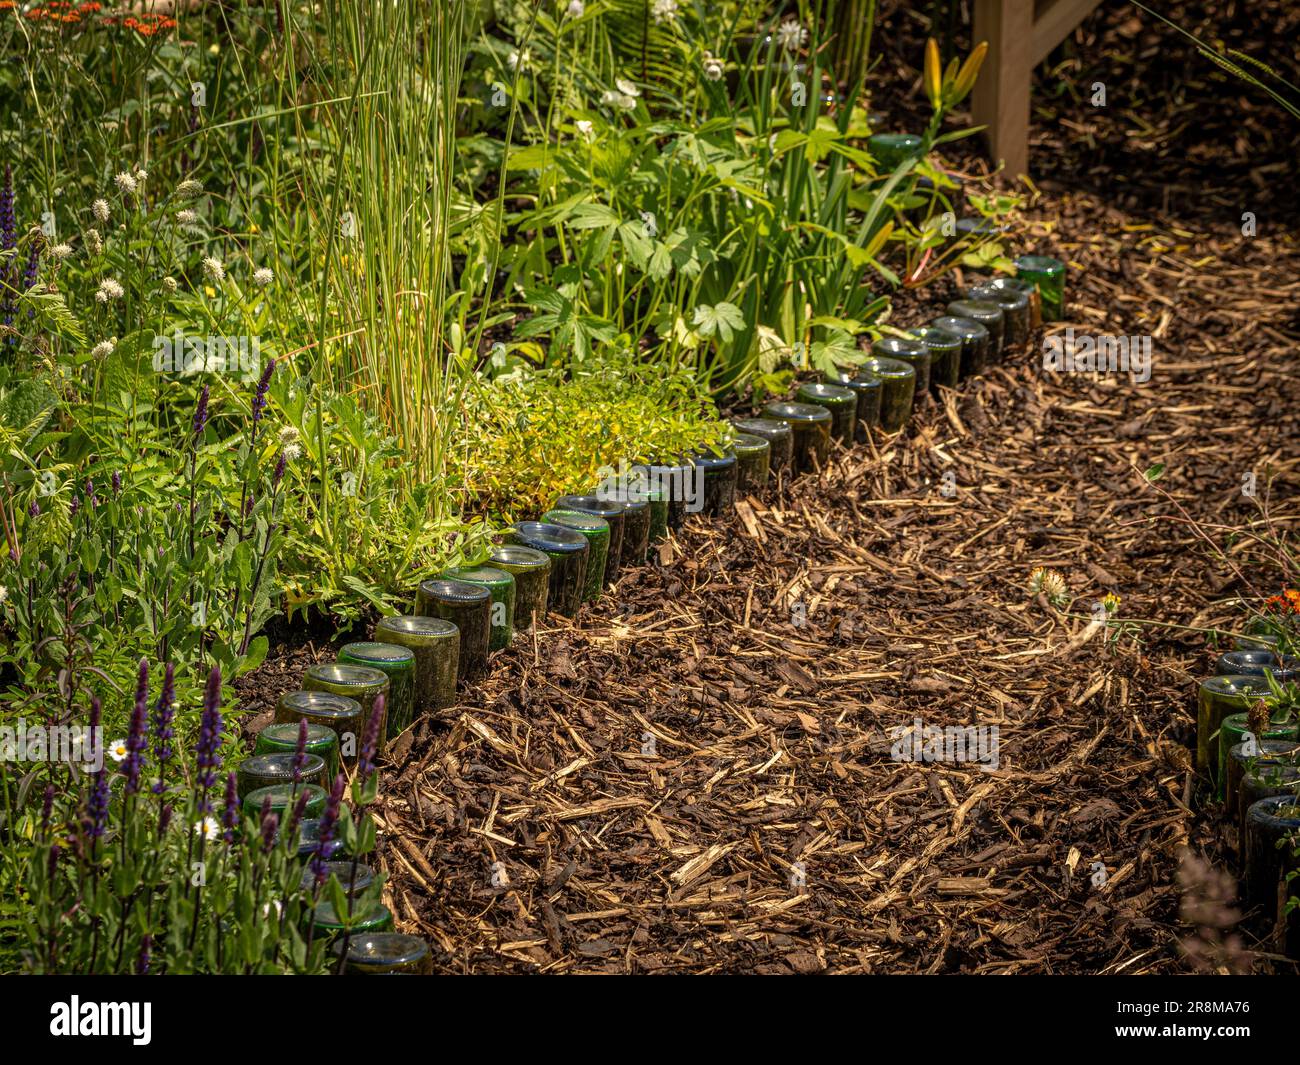 Bark chipping garden path edged with recycled wine bottles in a UK garden. Stock Photo